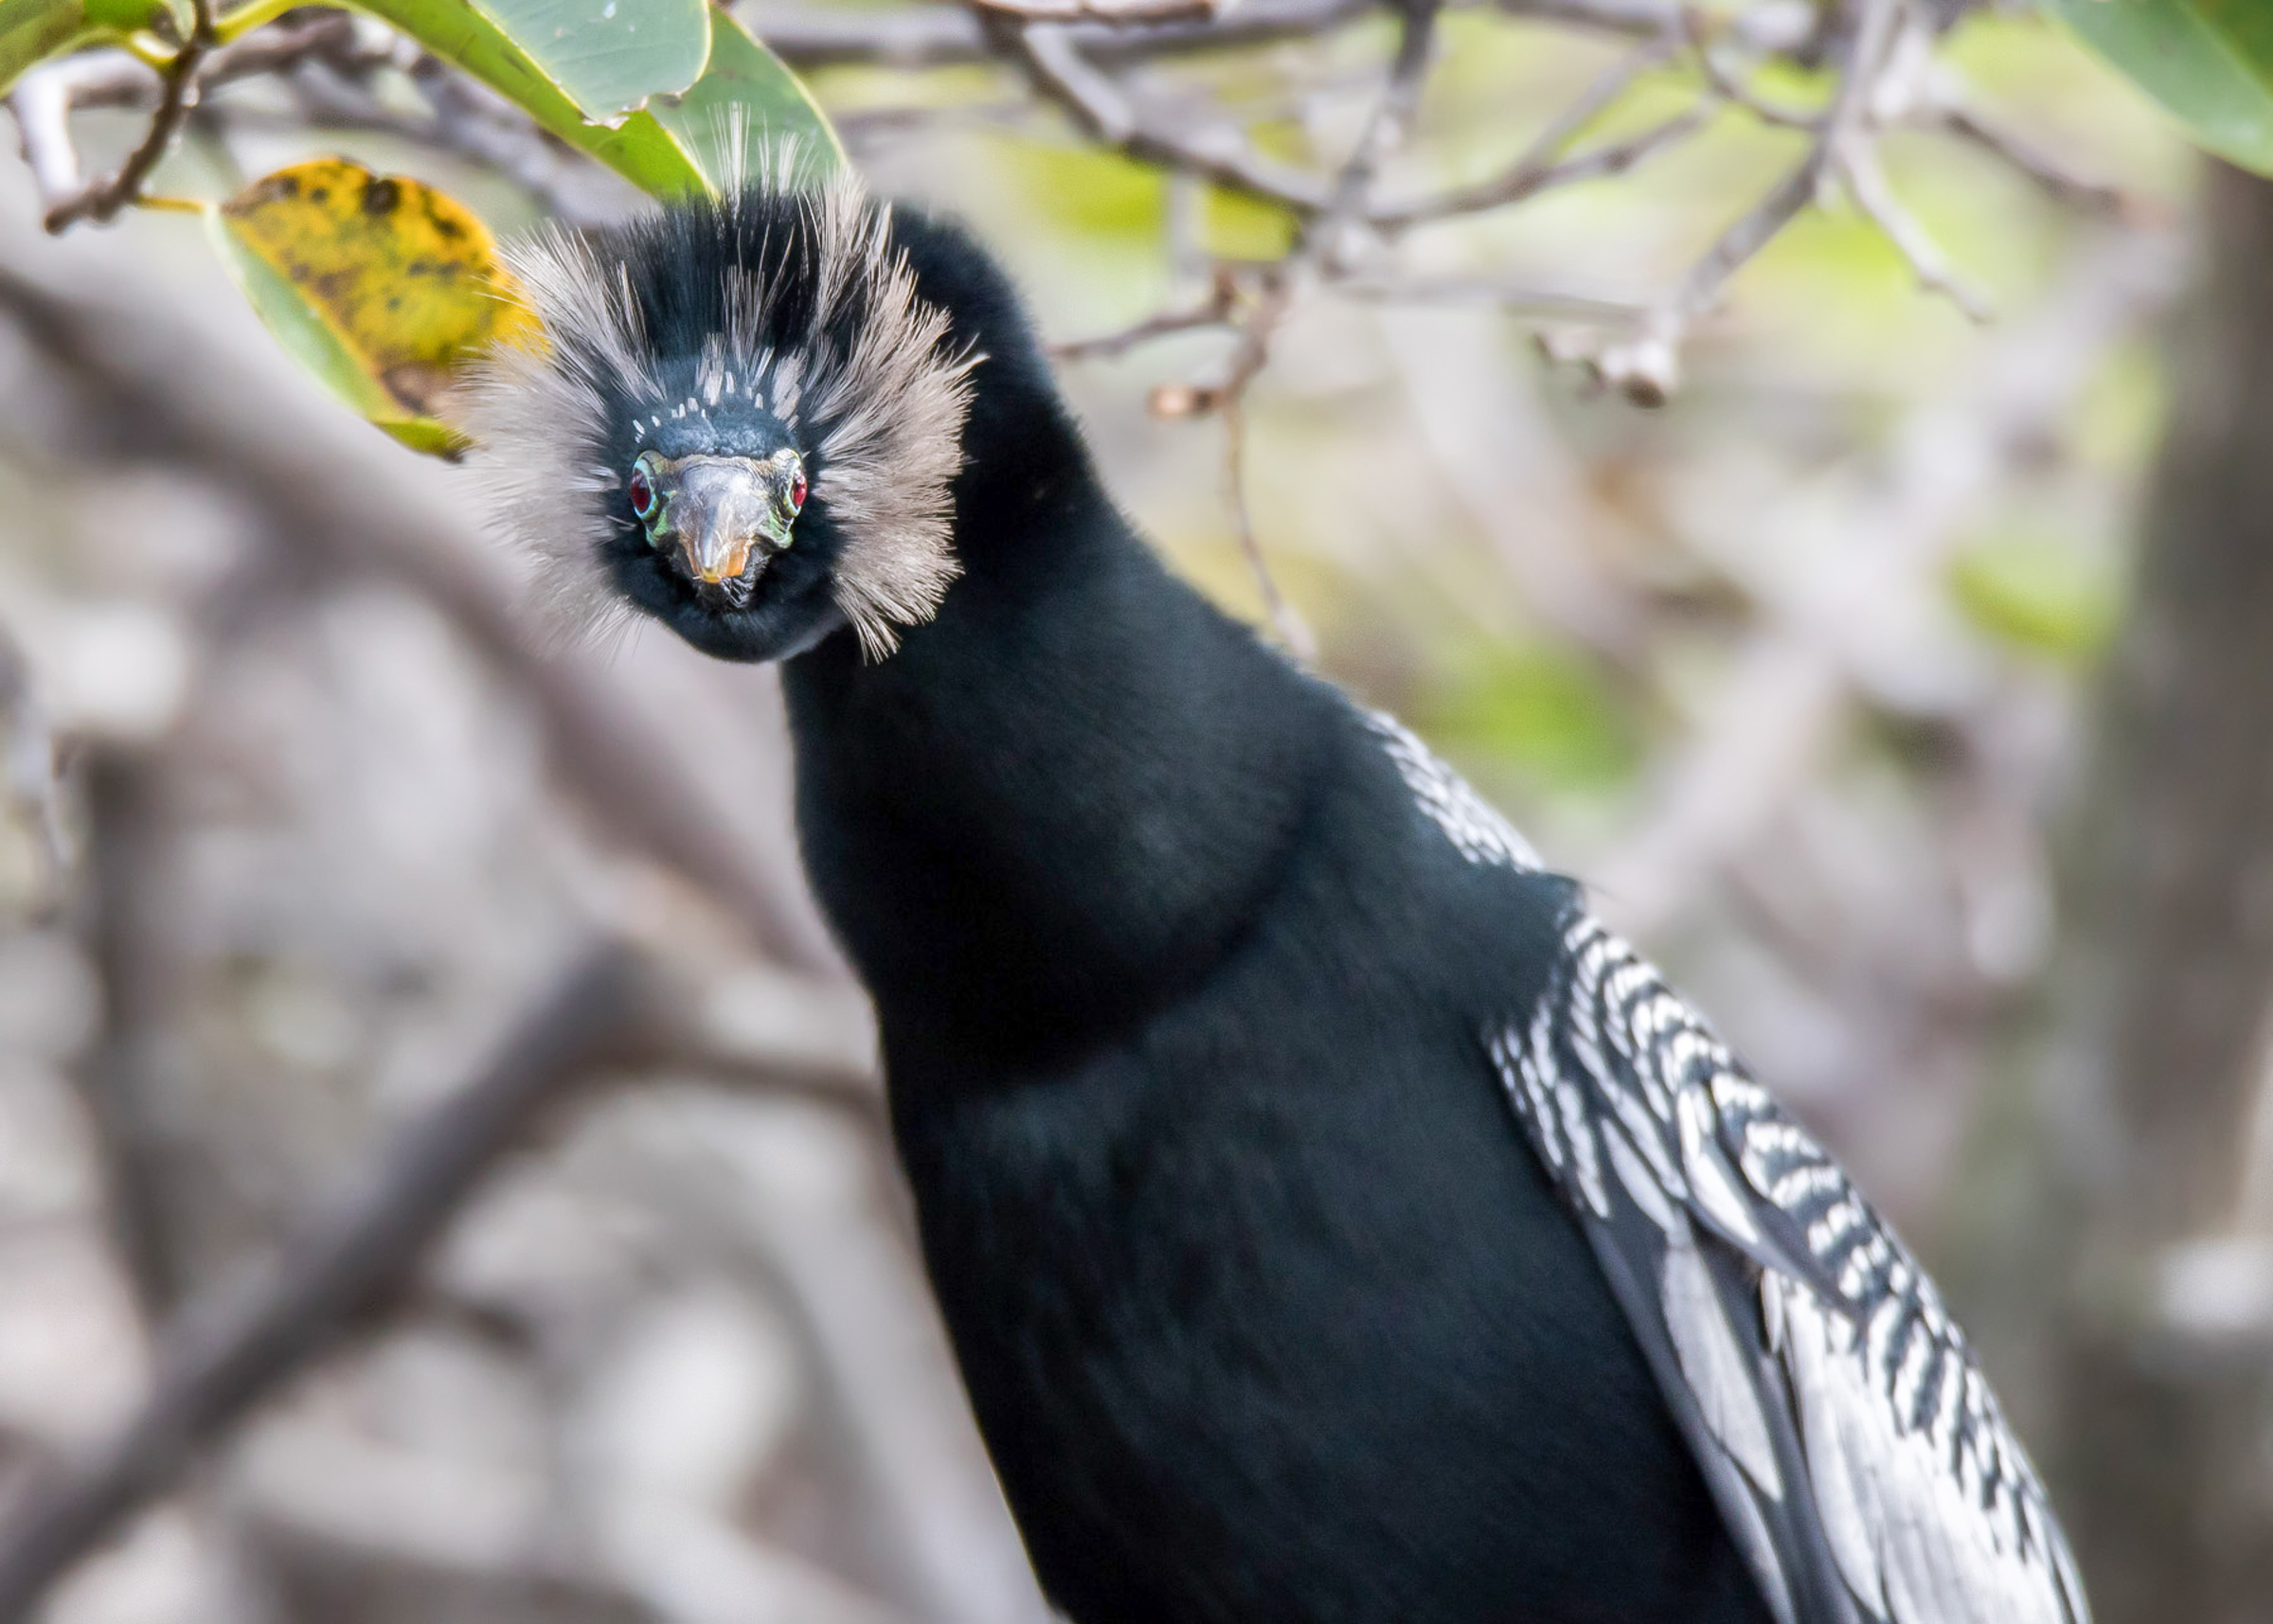 A black bird, the Anhinga, looking at the camera, with branches in the background.